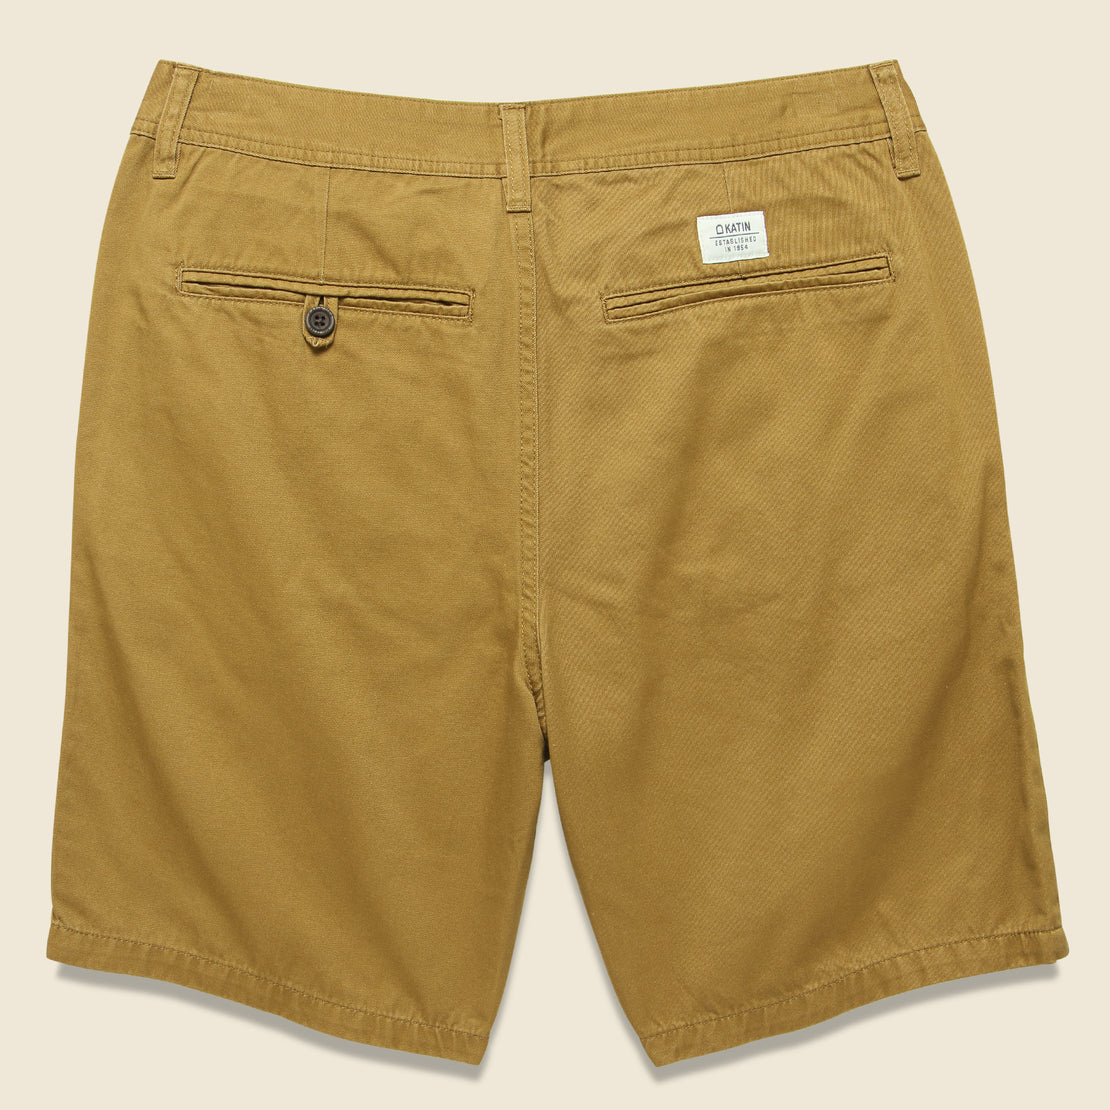 Cove Short - Light Brown - Katin - STAG Provisions - Shorts - Solid